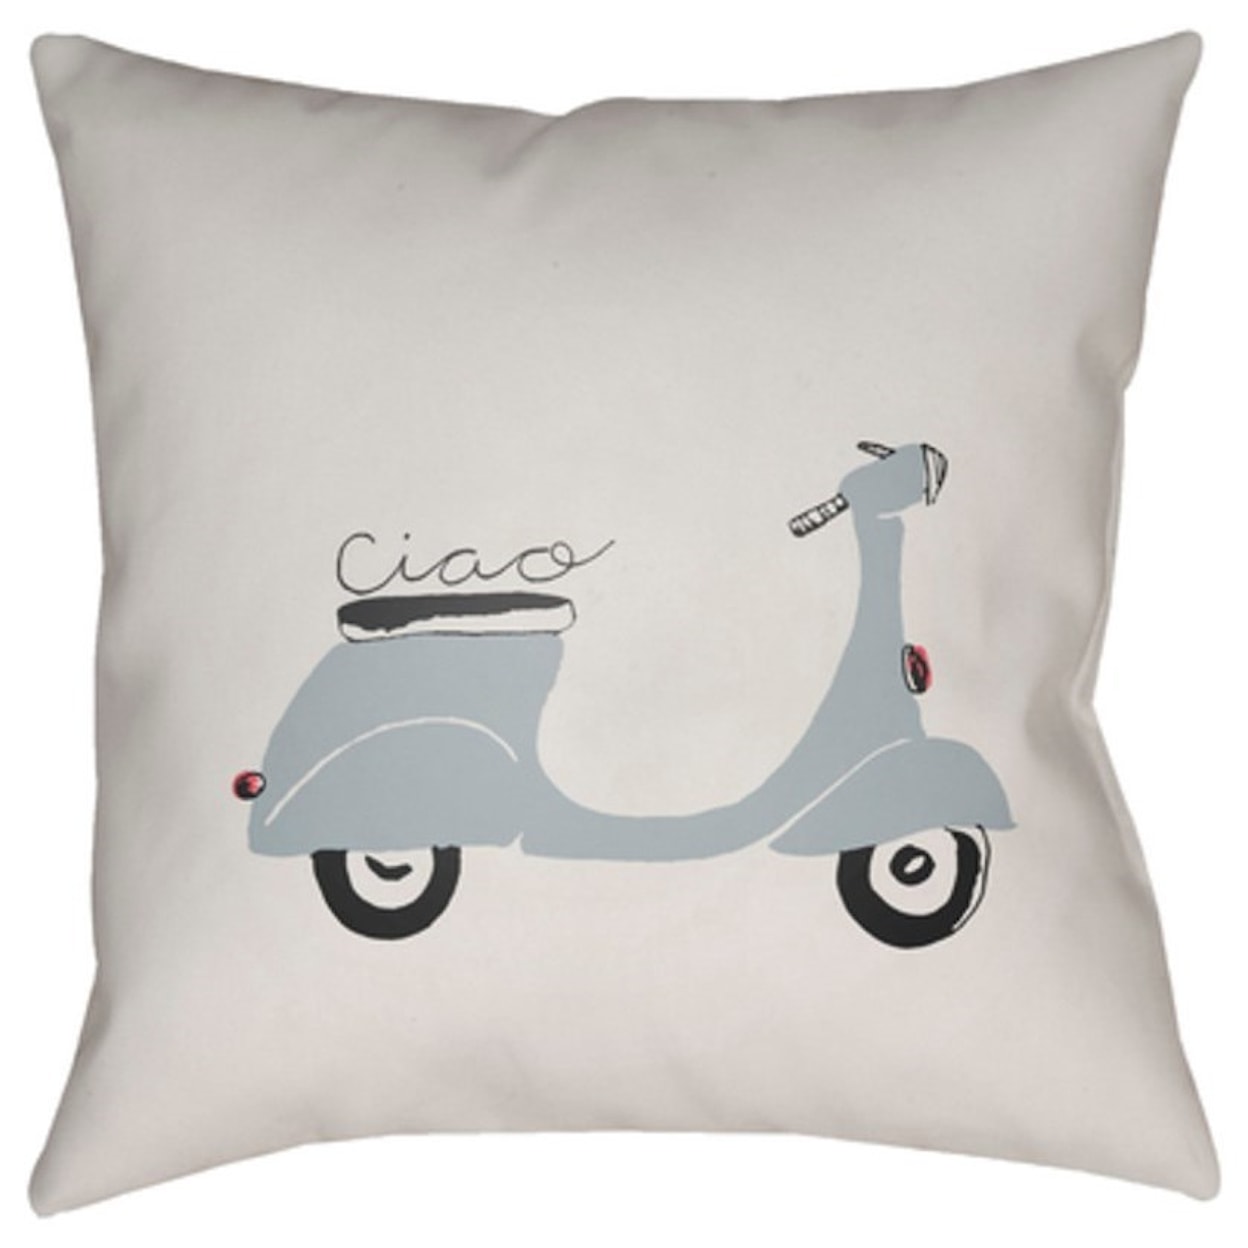 Ruby-Gordon Accents Ciao Pillow